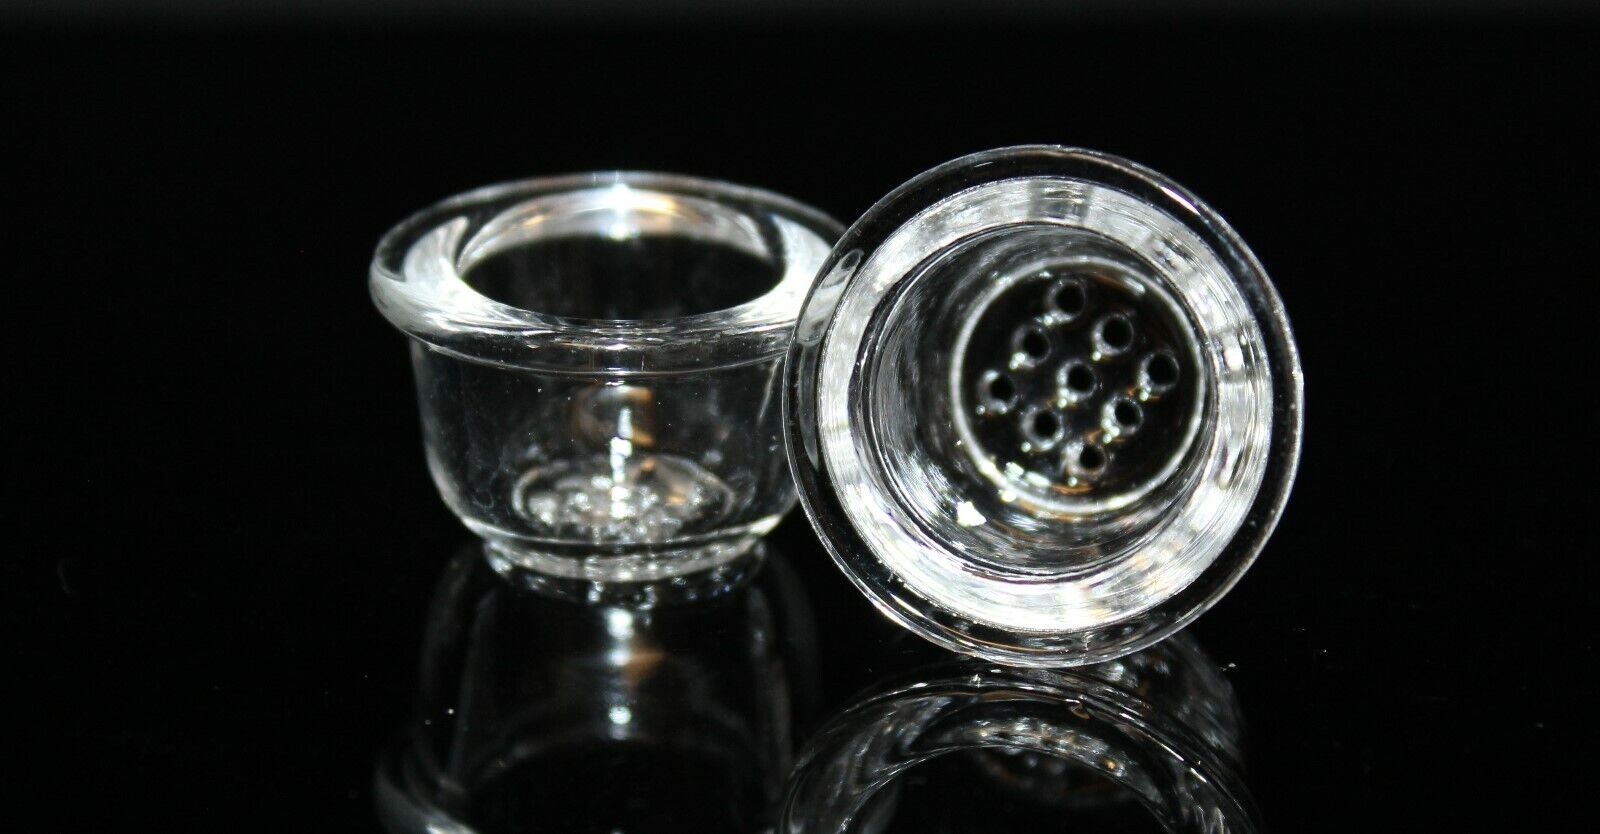 (2) REPLACEMENT Glass BOWLS for SILICONE Tobacco PIPES Bowl